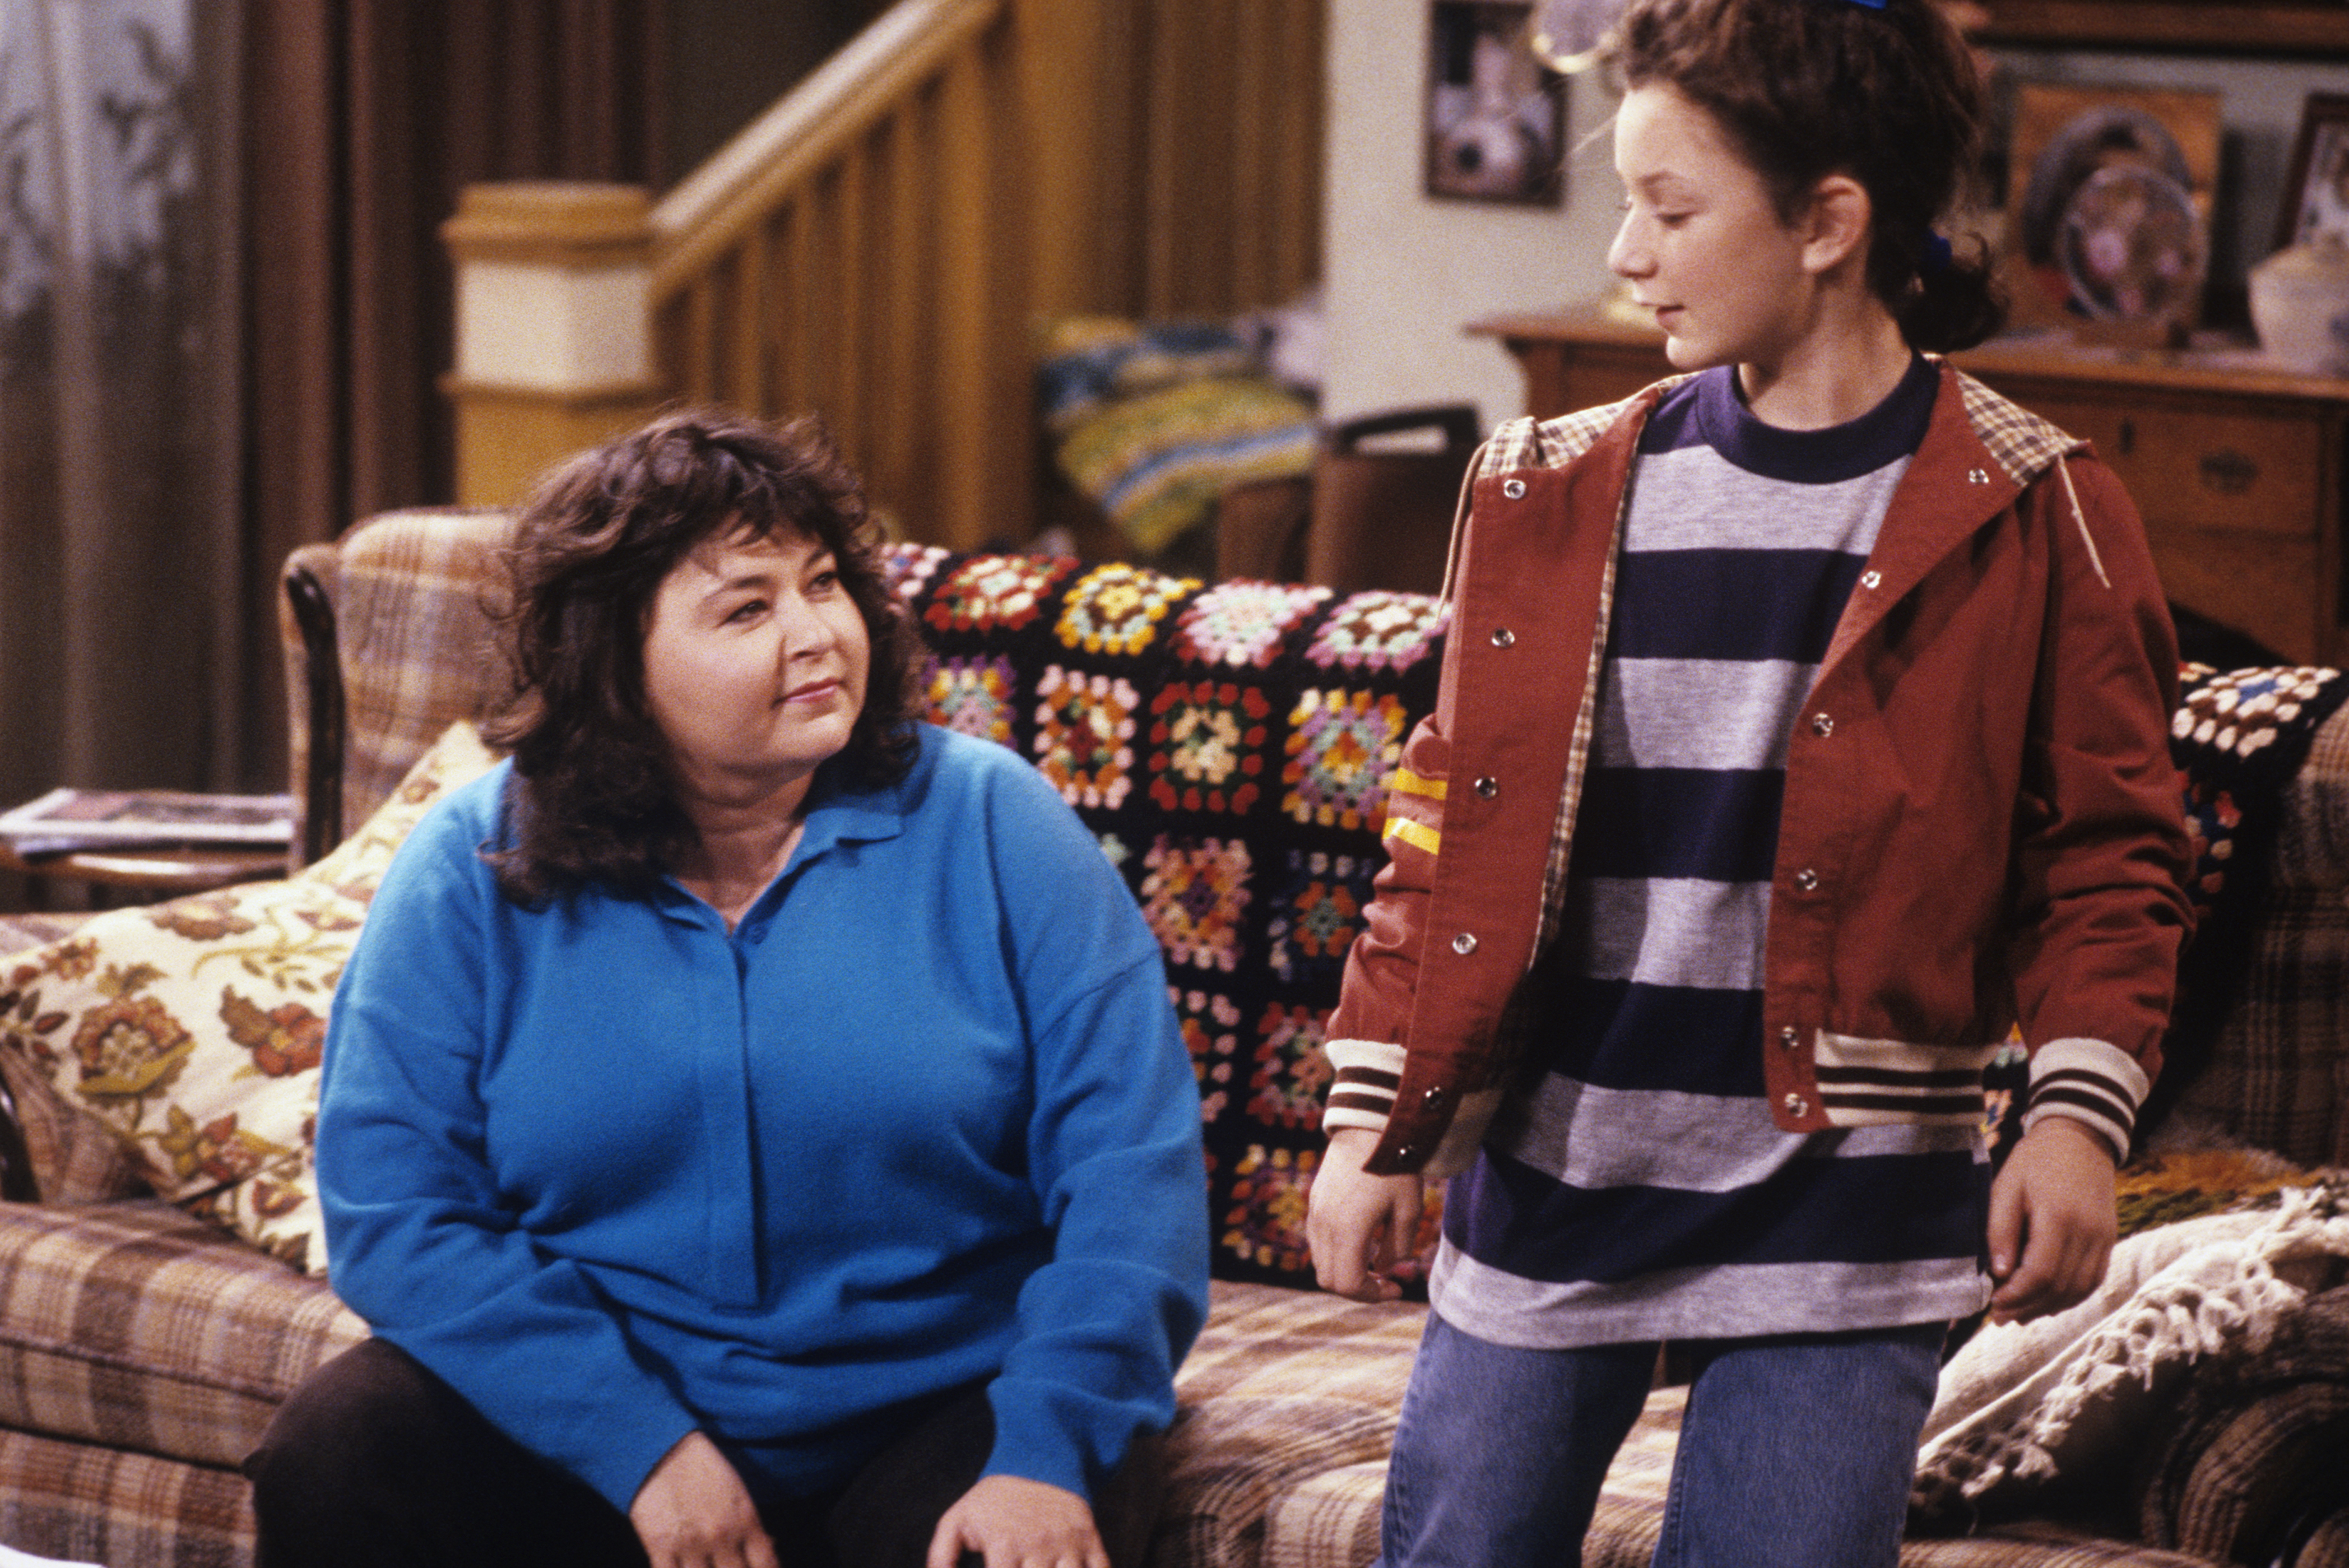 Roseanne Barr and Sara Gilbert on the "Roseanne" set on January 24, 1989 | Source: Getty Images